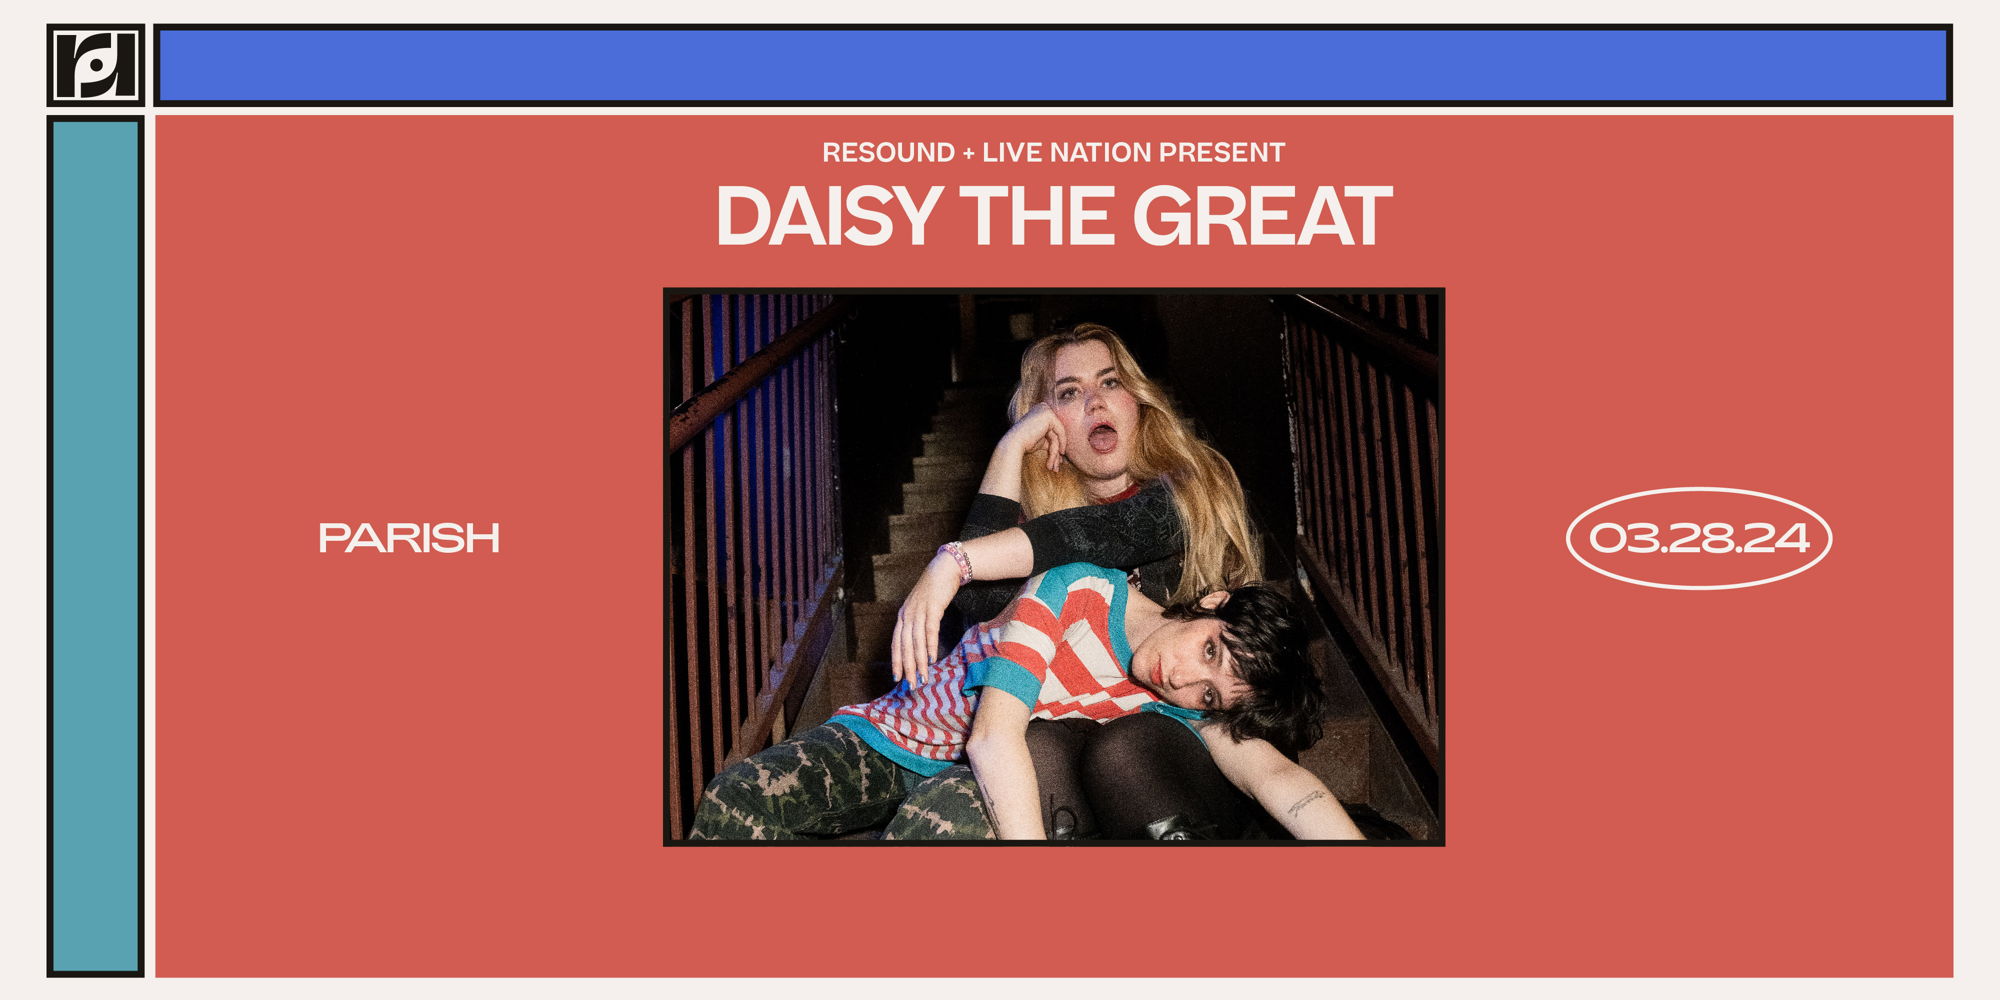 Live Nation & Resound Present: Daisy the Great at Parish on 3/28 promotional image